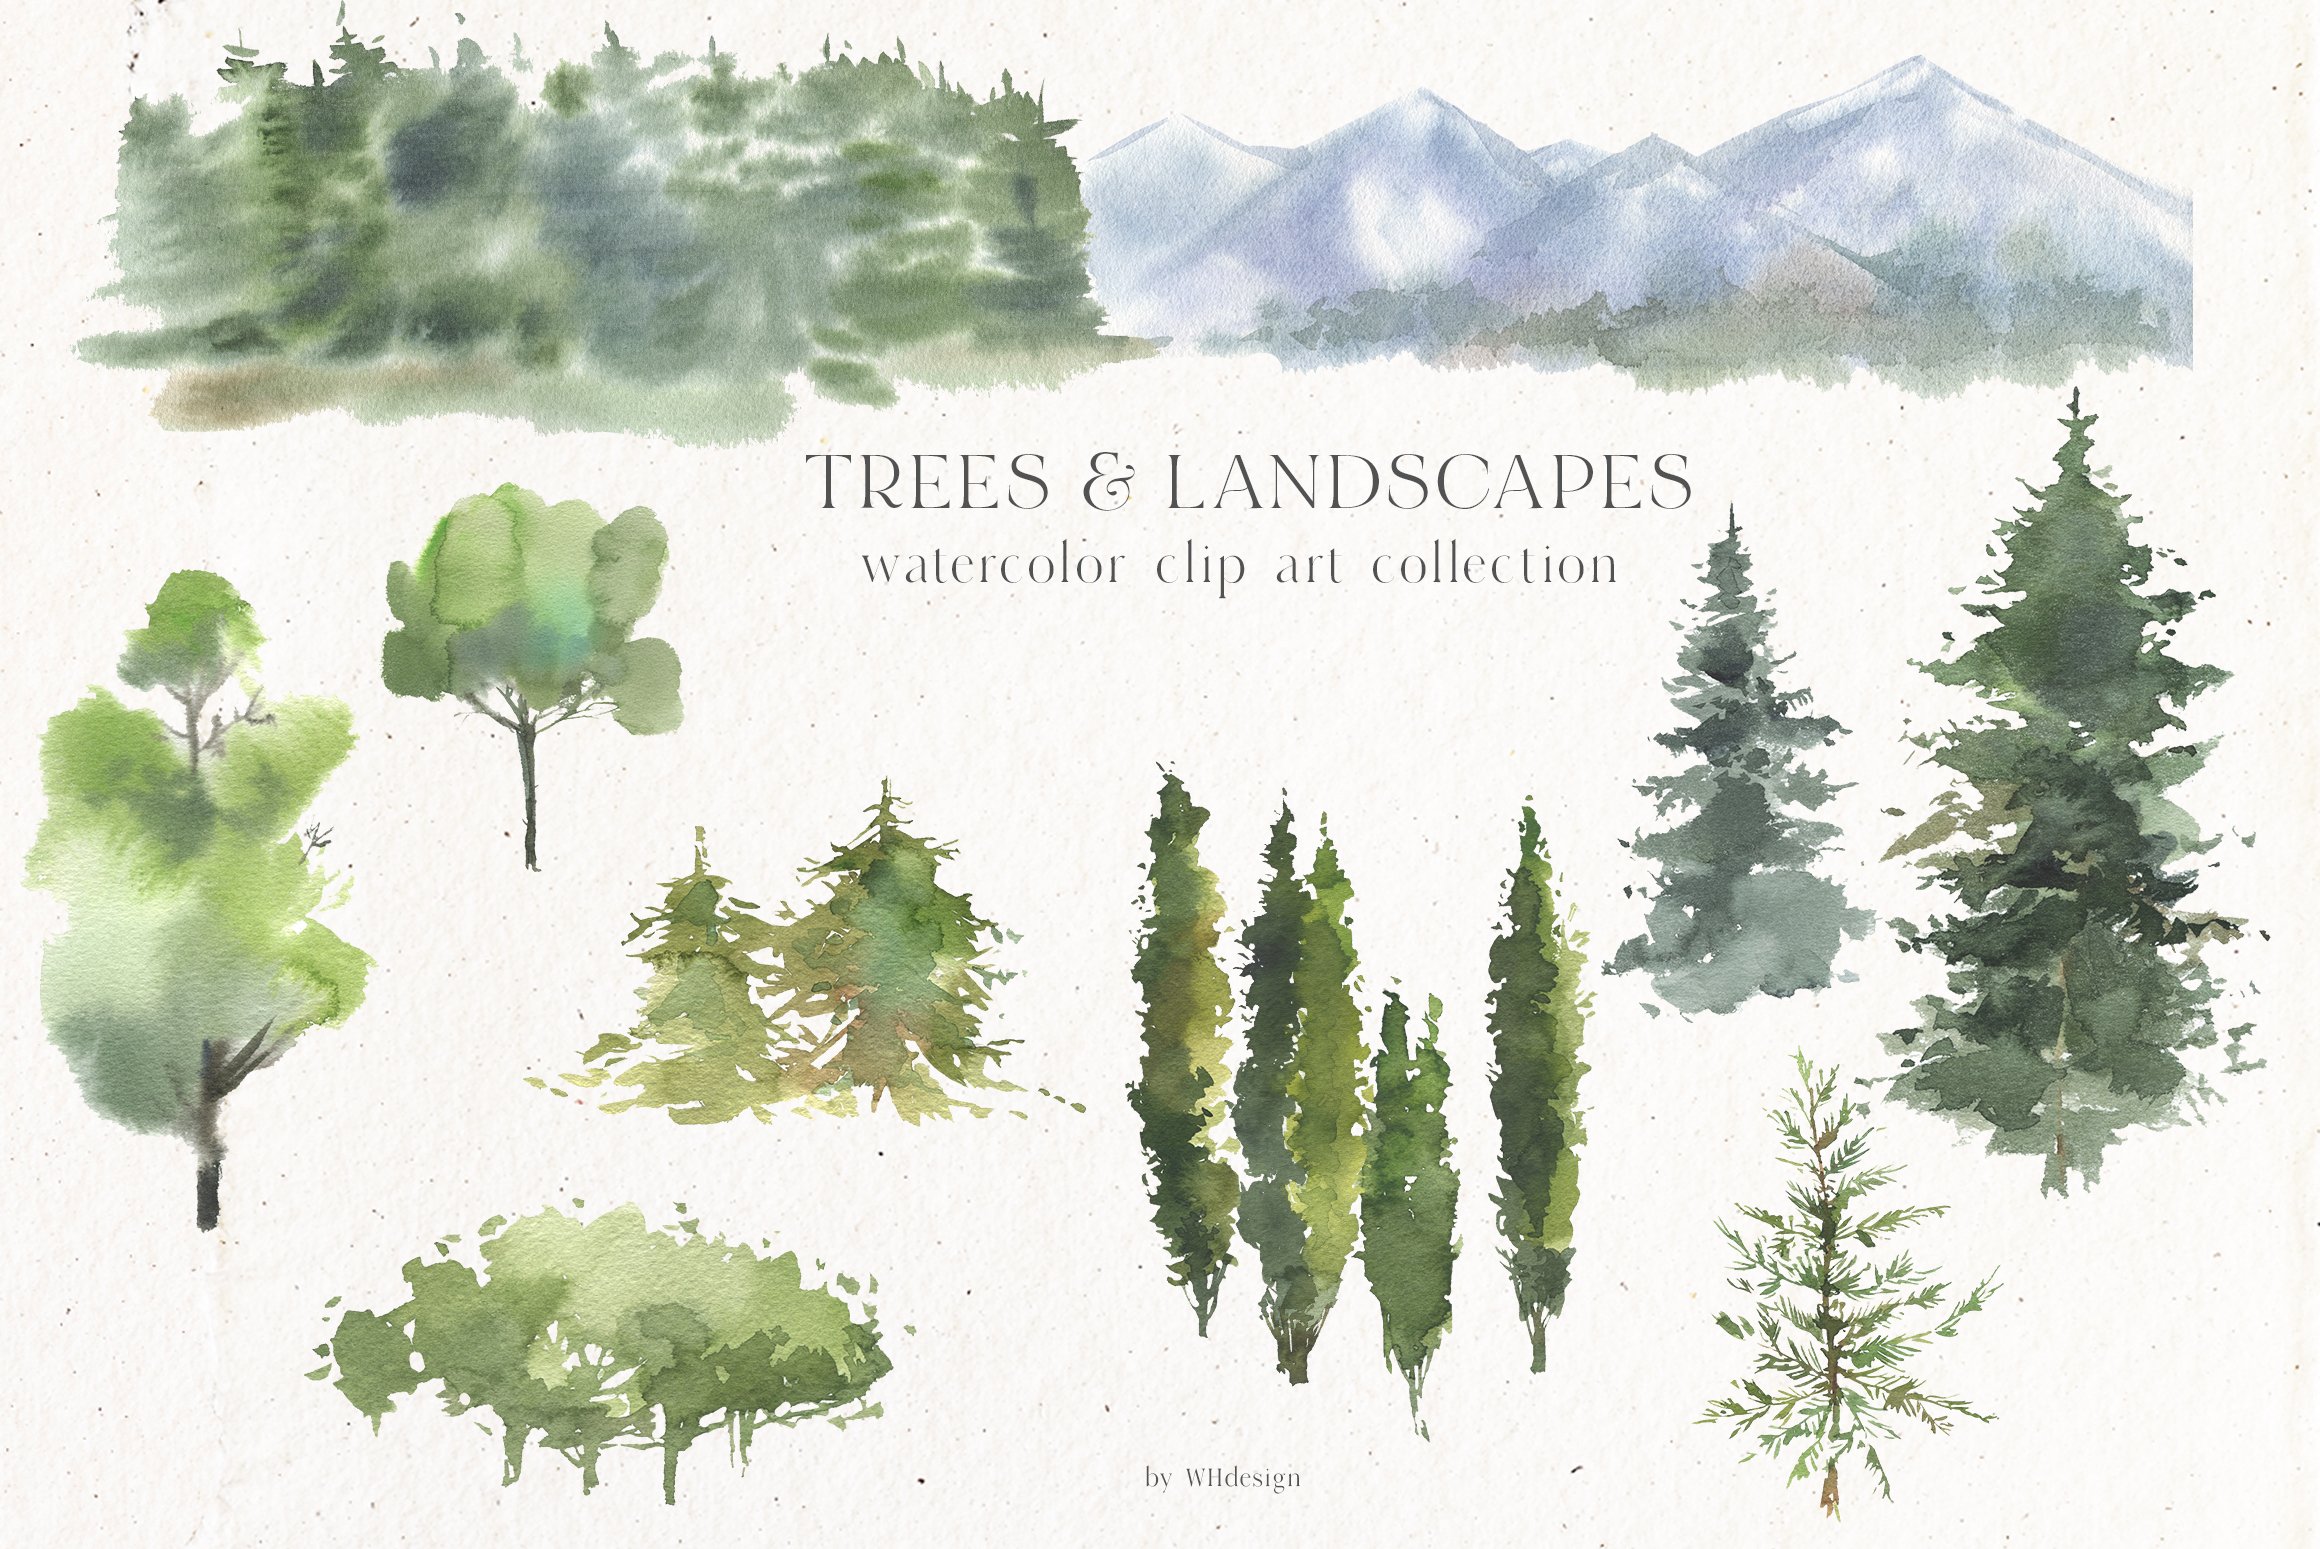 Trees & Mountains Watercolour cover image.